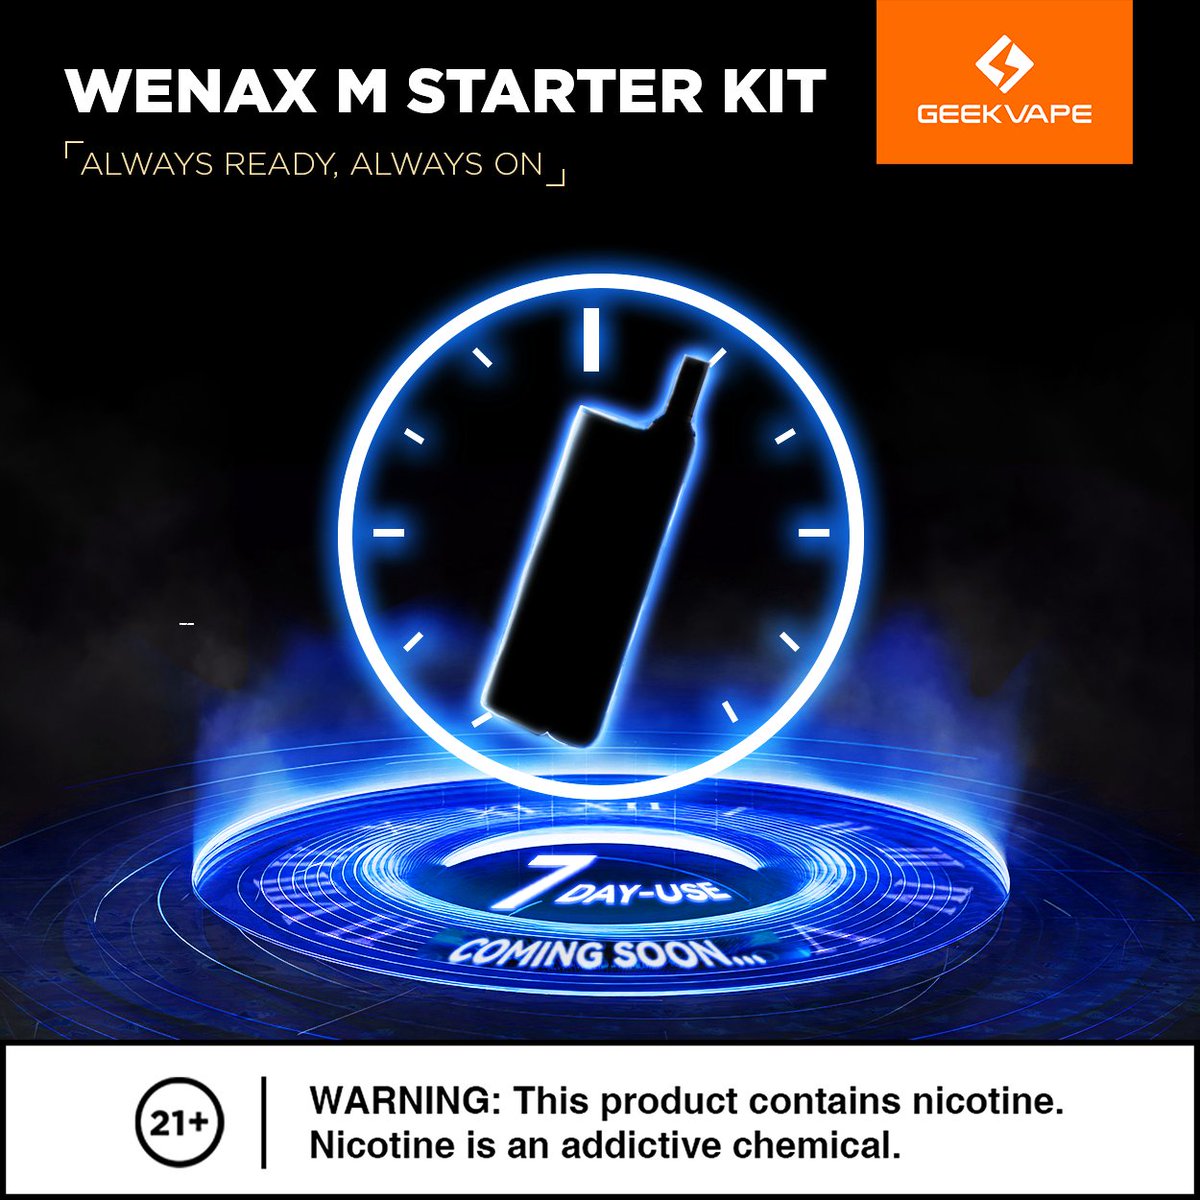 Get set to dive into vaping bliss with the upcoming WENAX M STARTER KIT! 💨 Don't miss out on its impressive 7-day battery life. Stay tuned for the launch! #AlwaysReadyAlwaysOn #WENAXMSTARTERKIT #geekvape #geekvapetech